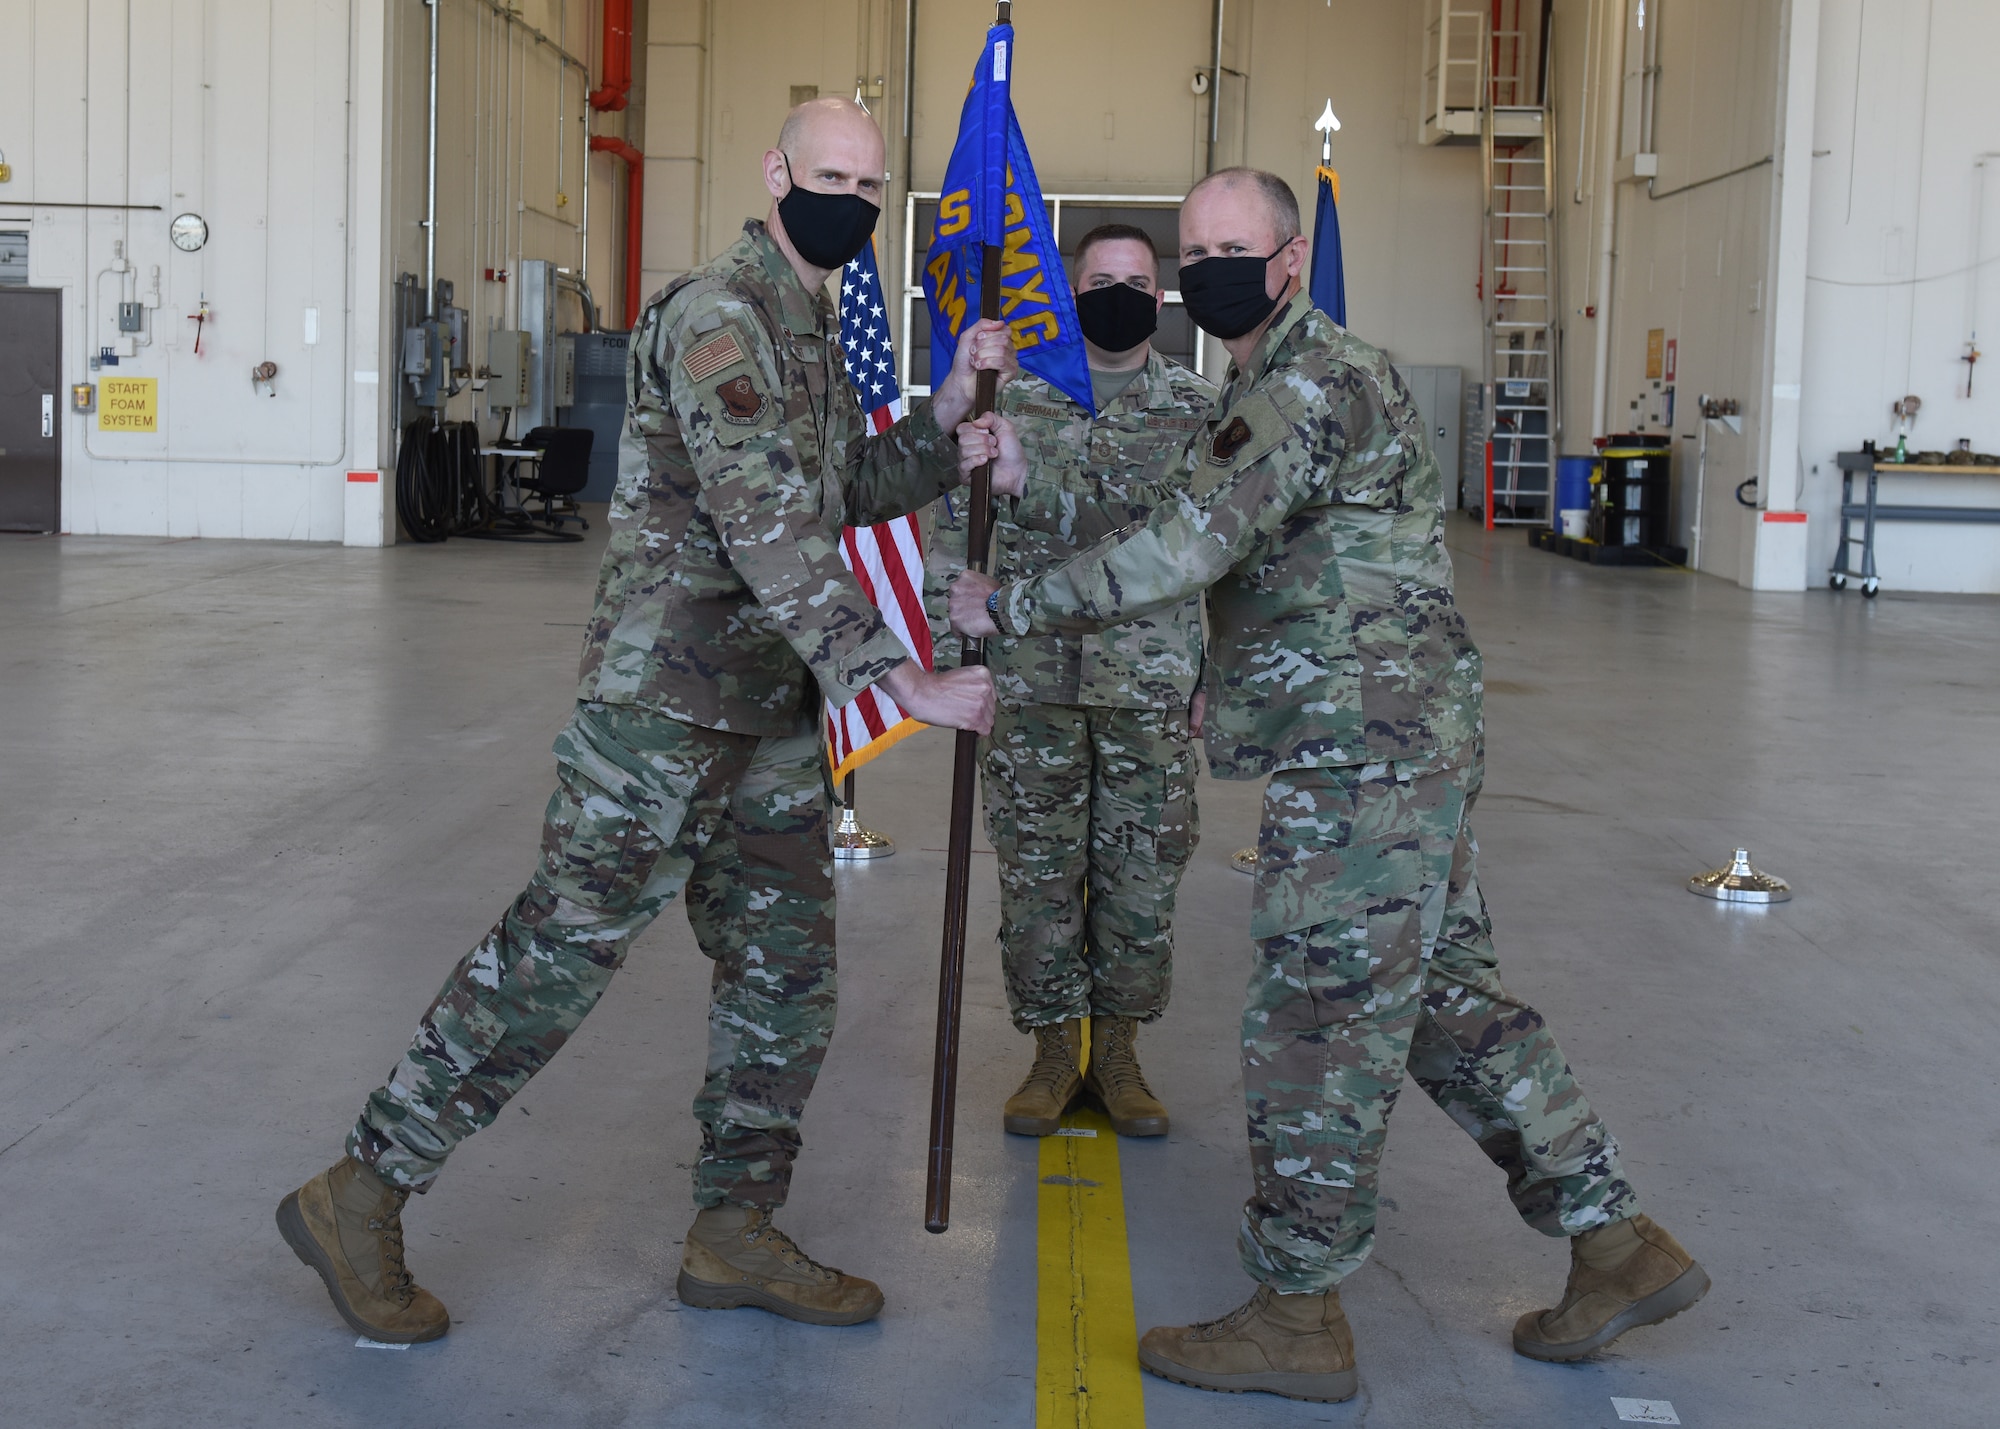 U.S. Air Force Lt. Col. Seth Cassell, right, accepts the 193rd Special Operations Aircraft Maintenance Squadron guidon from Col. Kristian Post, 193rd Special Operations Maintenance Group commander, Pennsylvania Air National Guard, during an assuption of command ceremony May 15, 2021, at the 193rd Special Operations Wing in Middletown, Pennsylvania. Cassell assumed command of the 193rd SOAMXS after serving in various positions within the 193rd Special Operations Group and SOMXG. (U.S. Air National Guard photo by Master Sgt. Matt Schwartz)